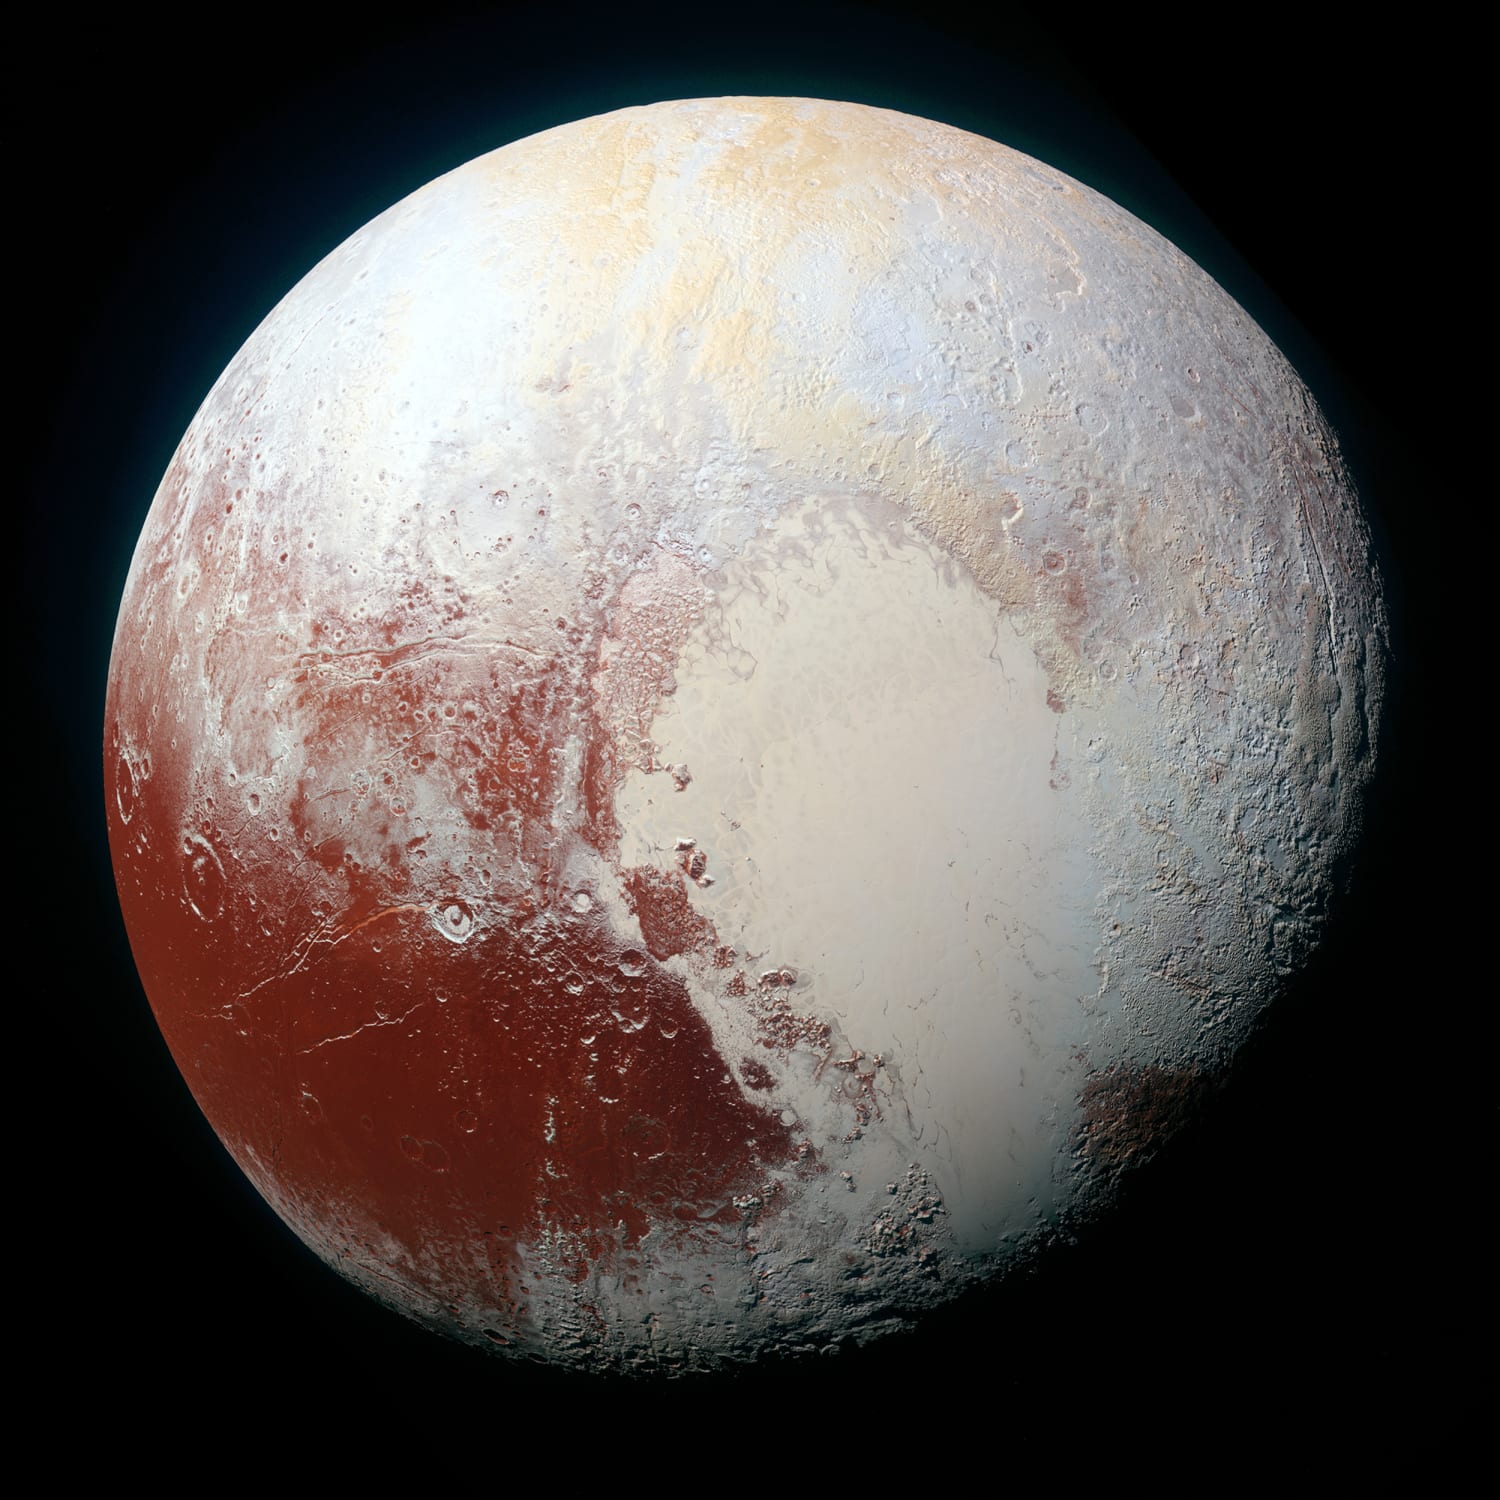 Pluto's 'Heart' is Filled With